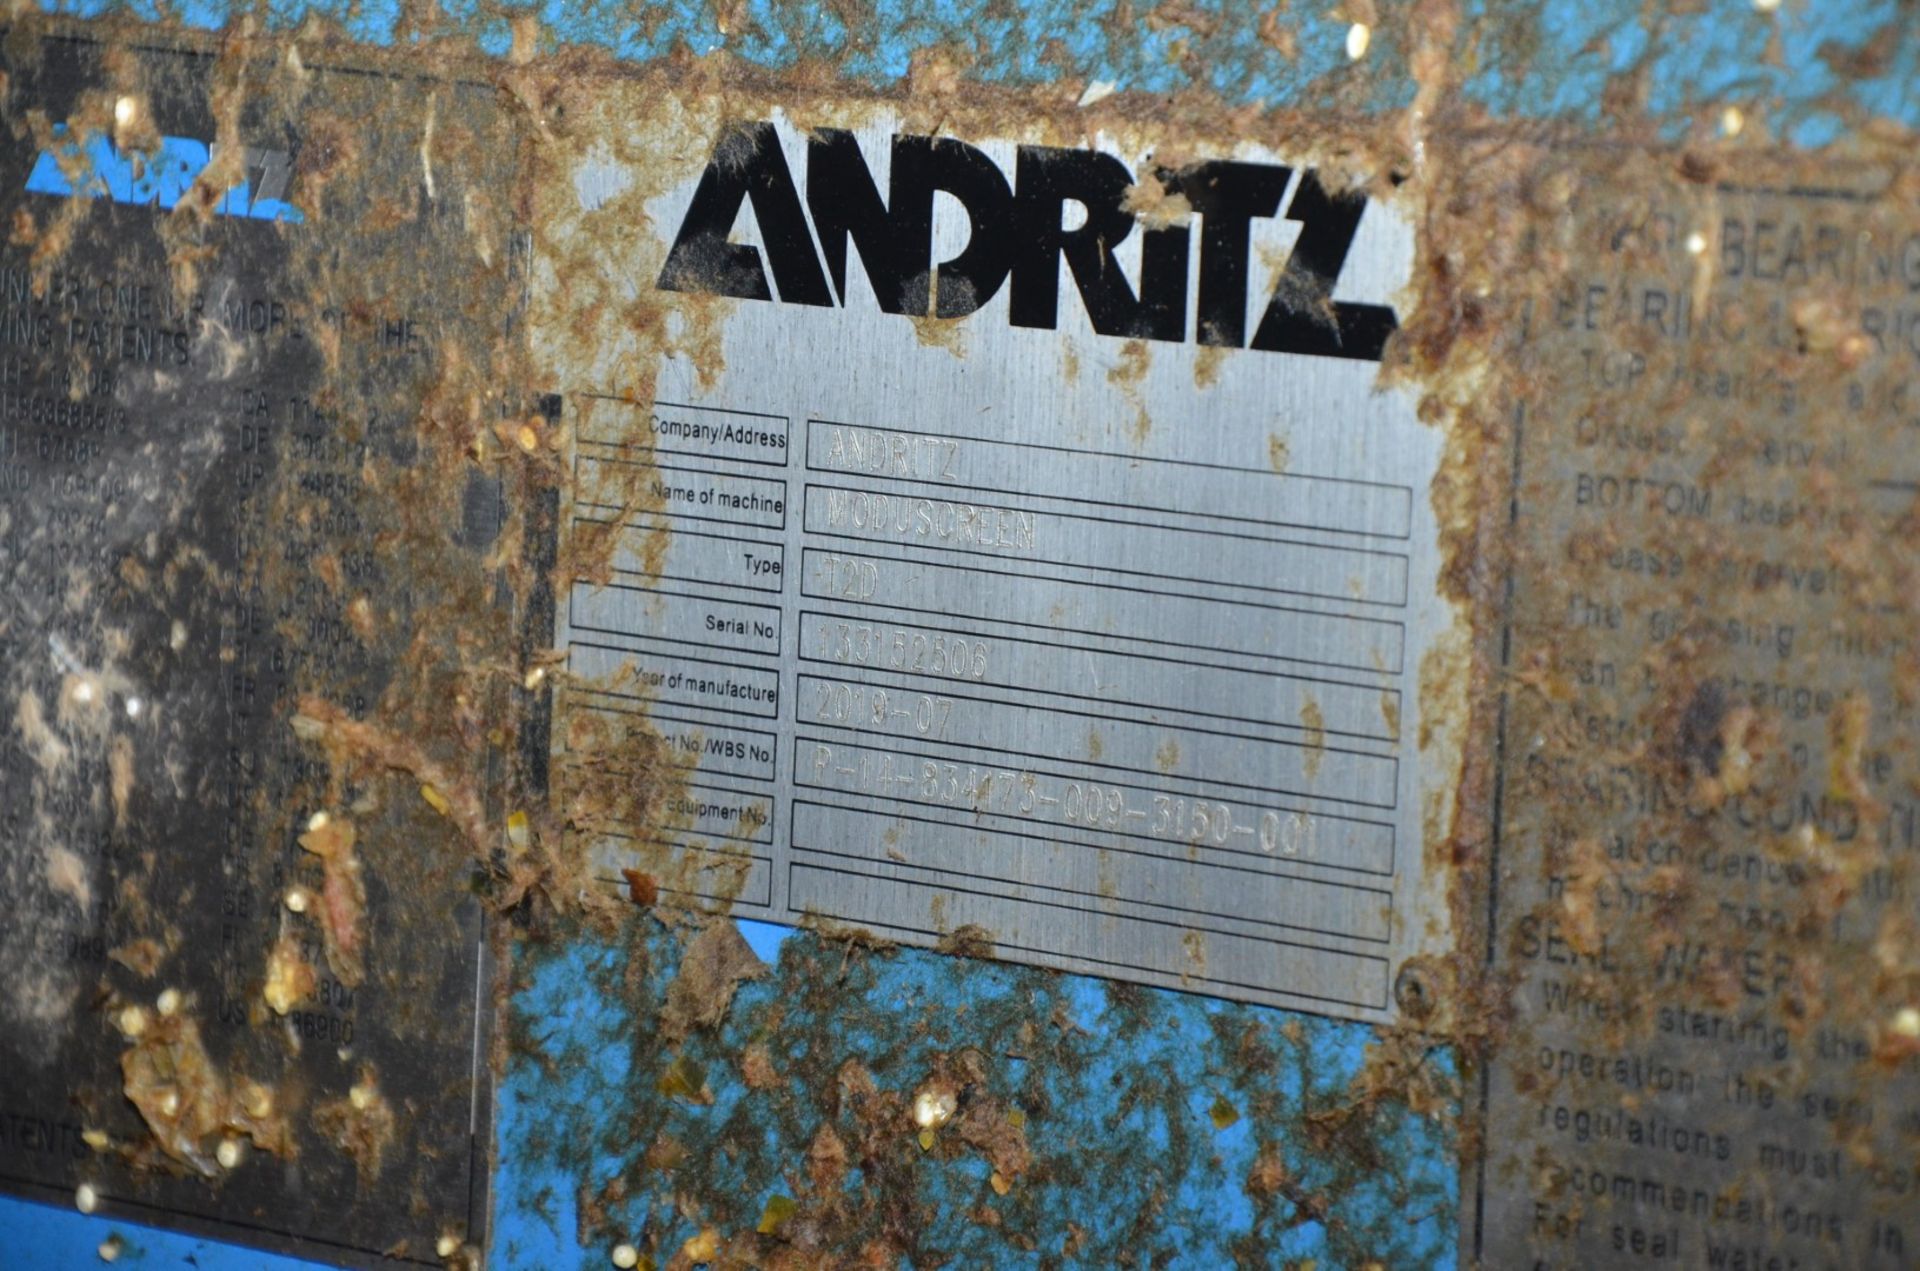 ANDRITZ (2019) FG 02 FIBREGUARD STAINLESS STEEL LIGHT AND SMALL HEAVY REJECT DETRASHER CENTRIFUGAL - Image 4 of 8